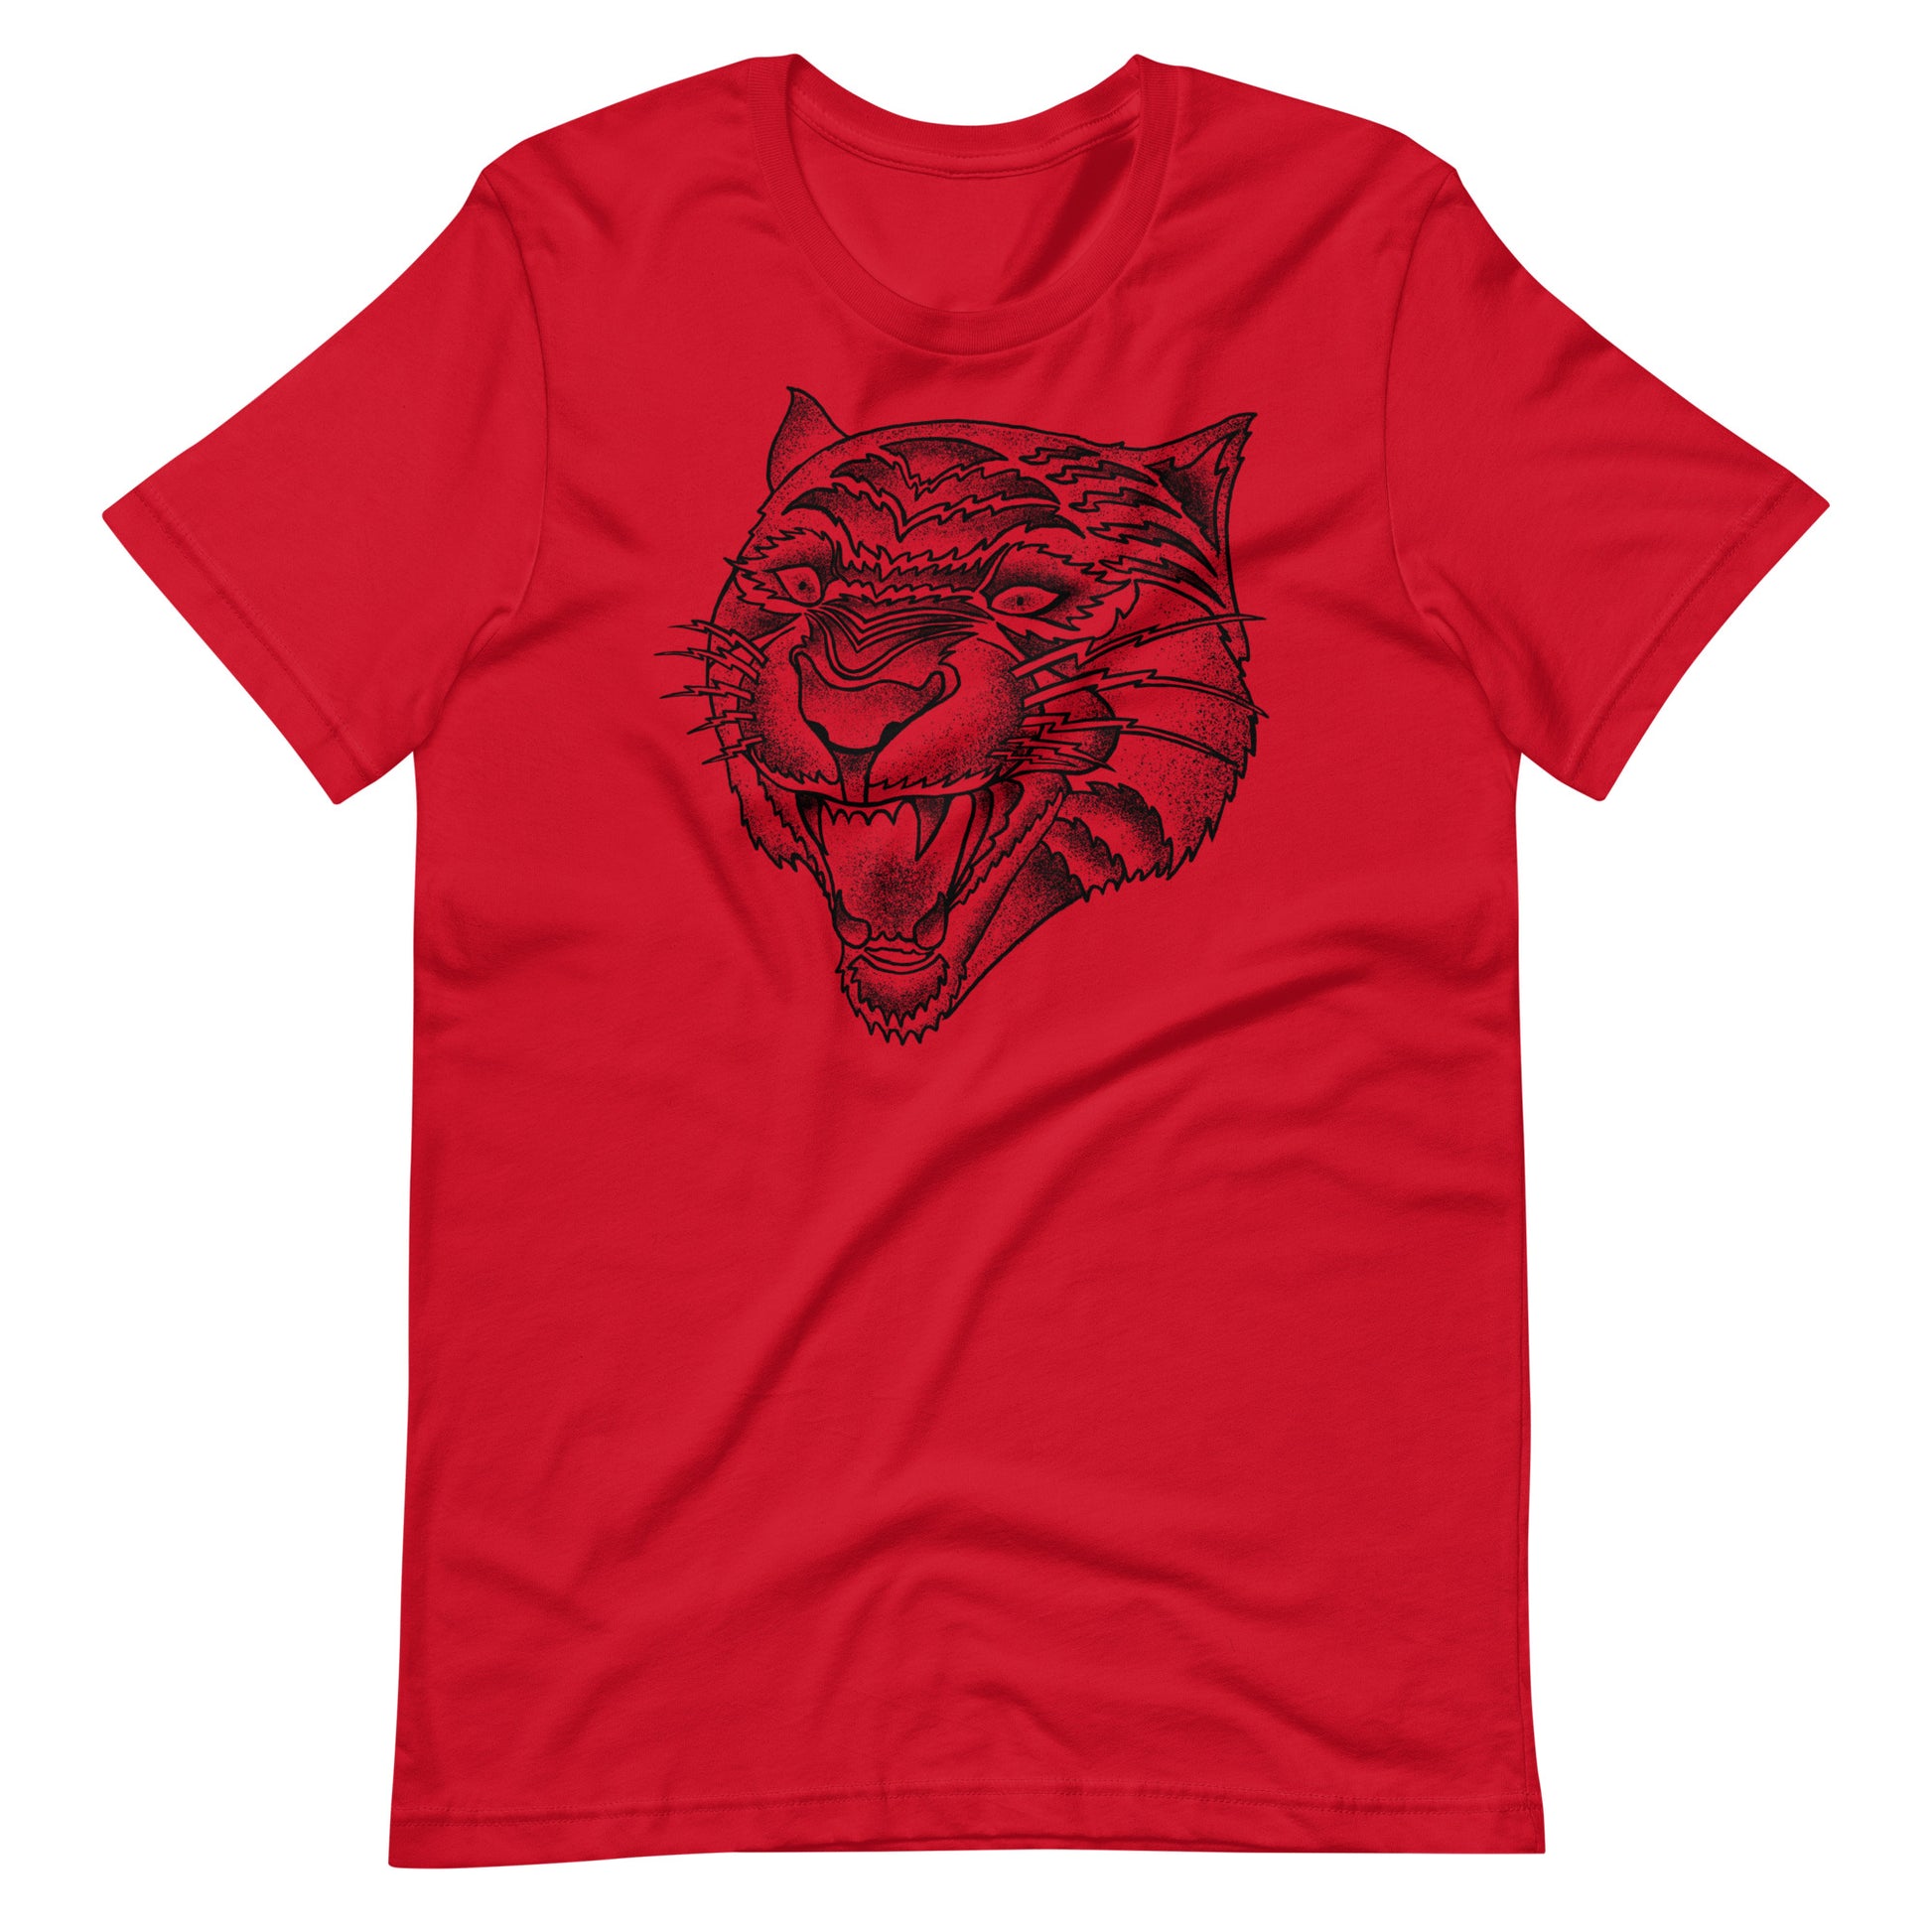 Panther Black - Men's t-shirt - Red Front